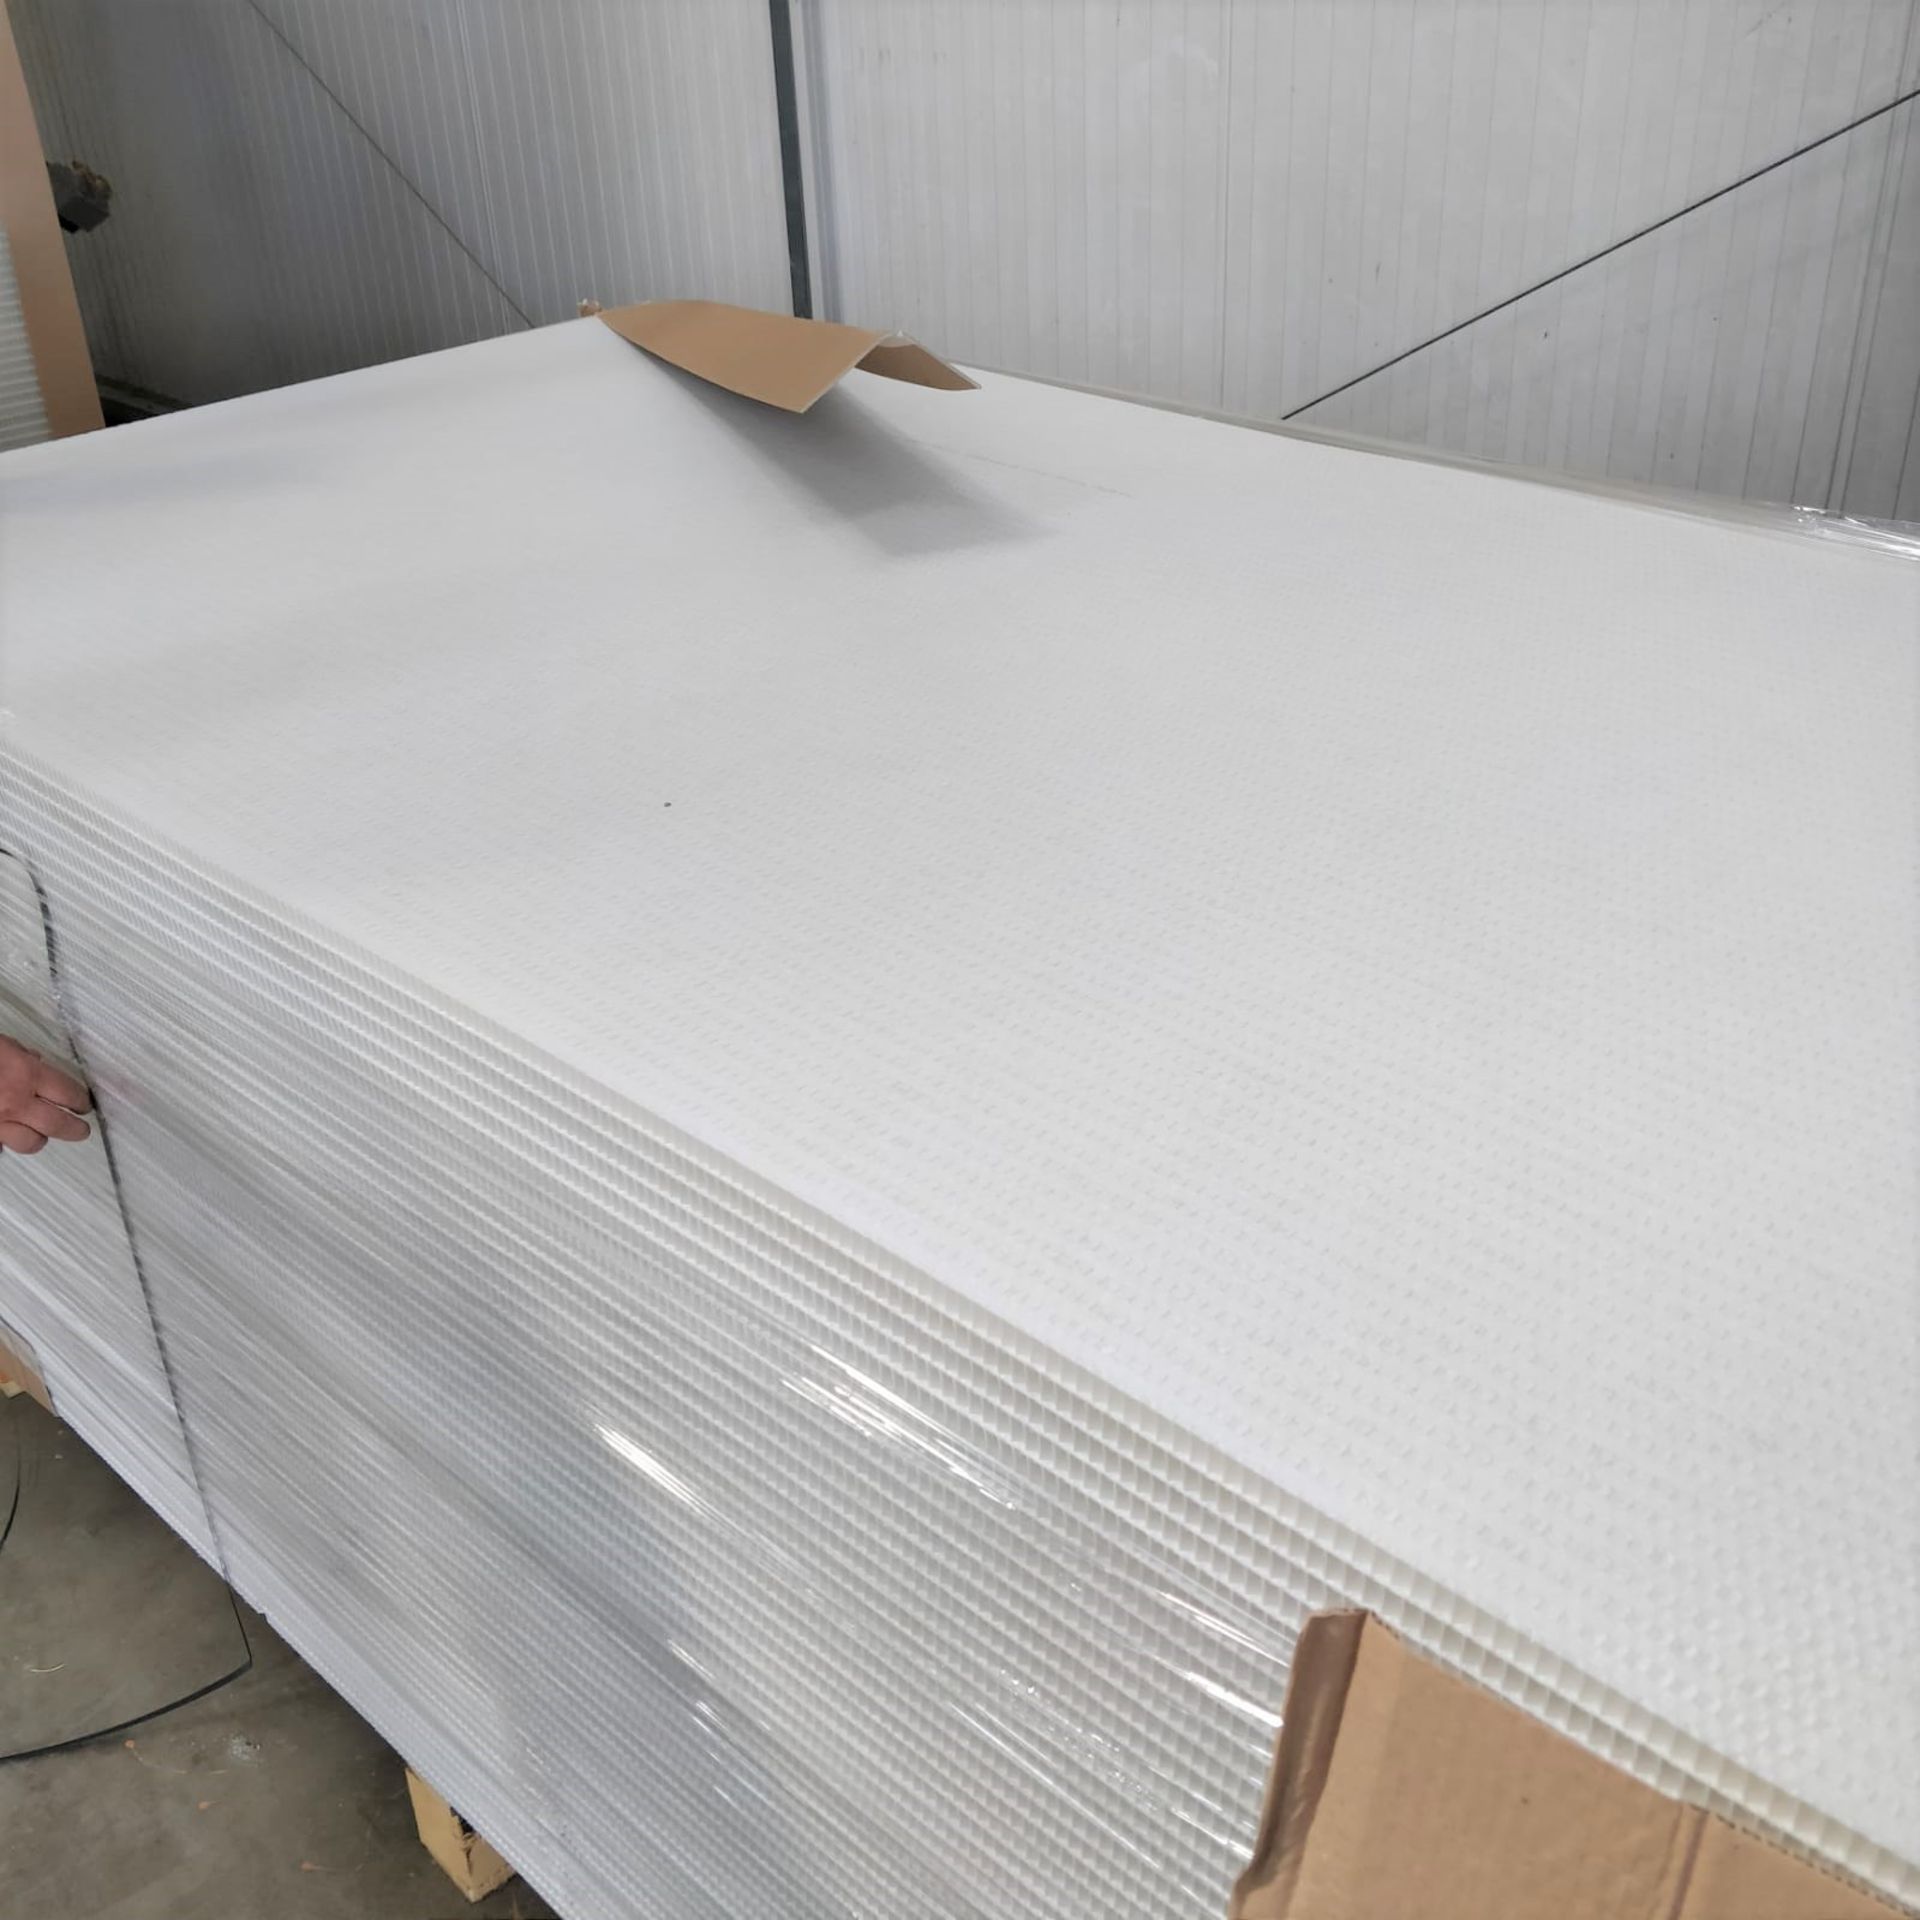 24 x ThermHex Thermoplastic Honeycomb Core Panels - Size Approx 2630 x 1210 x 18mm - New Stock - - Image 2 of 6